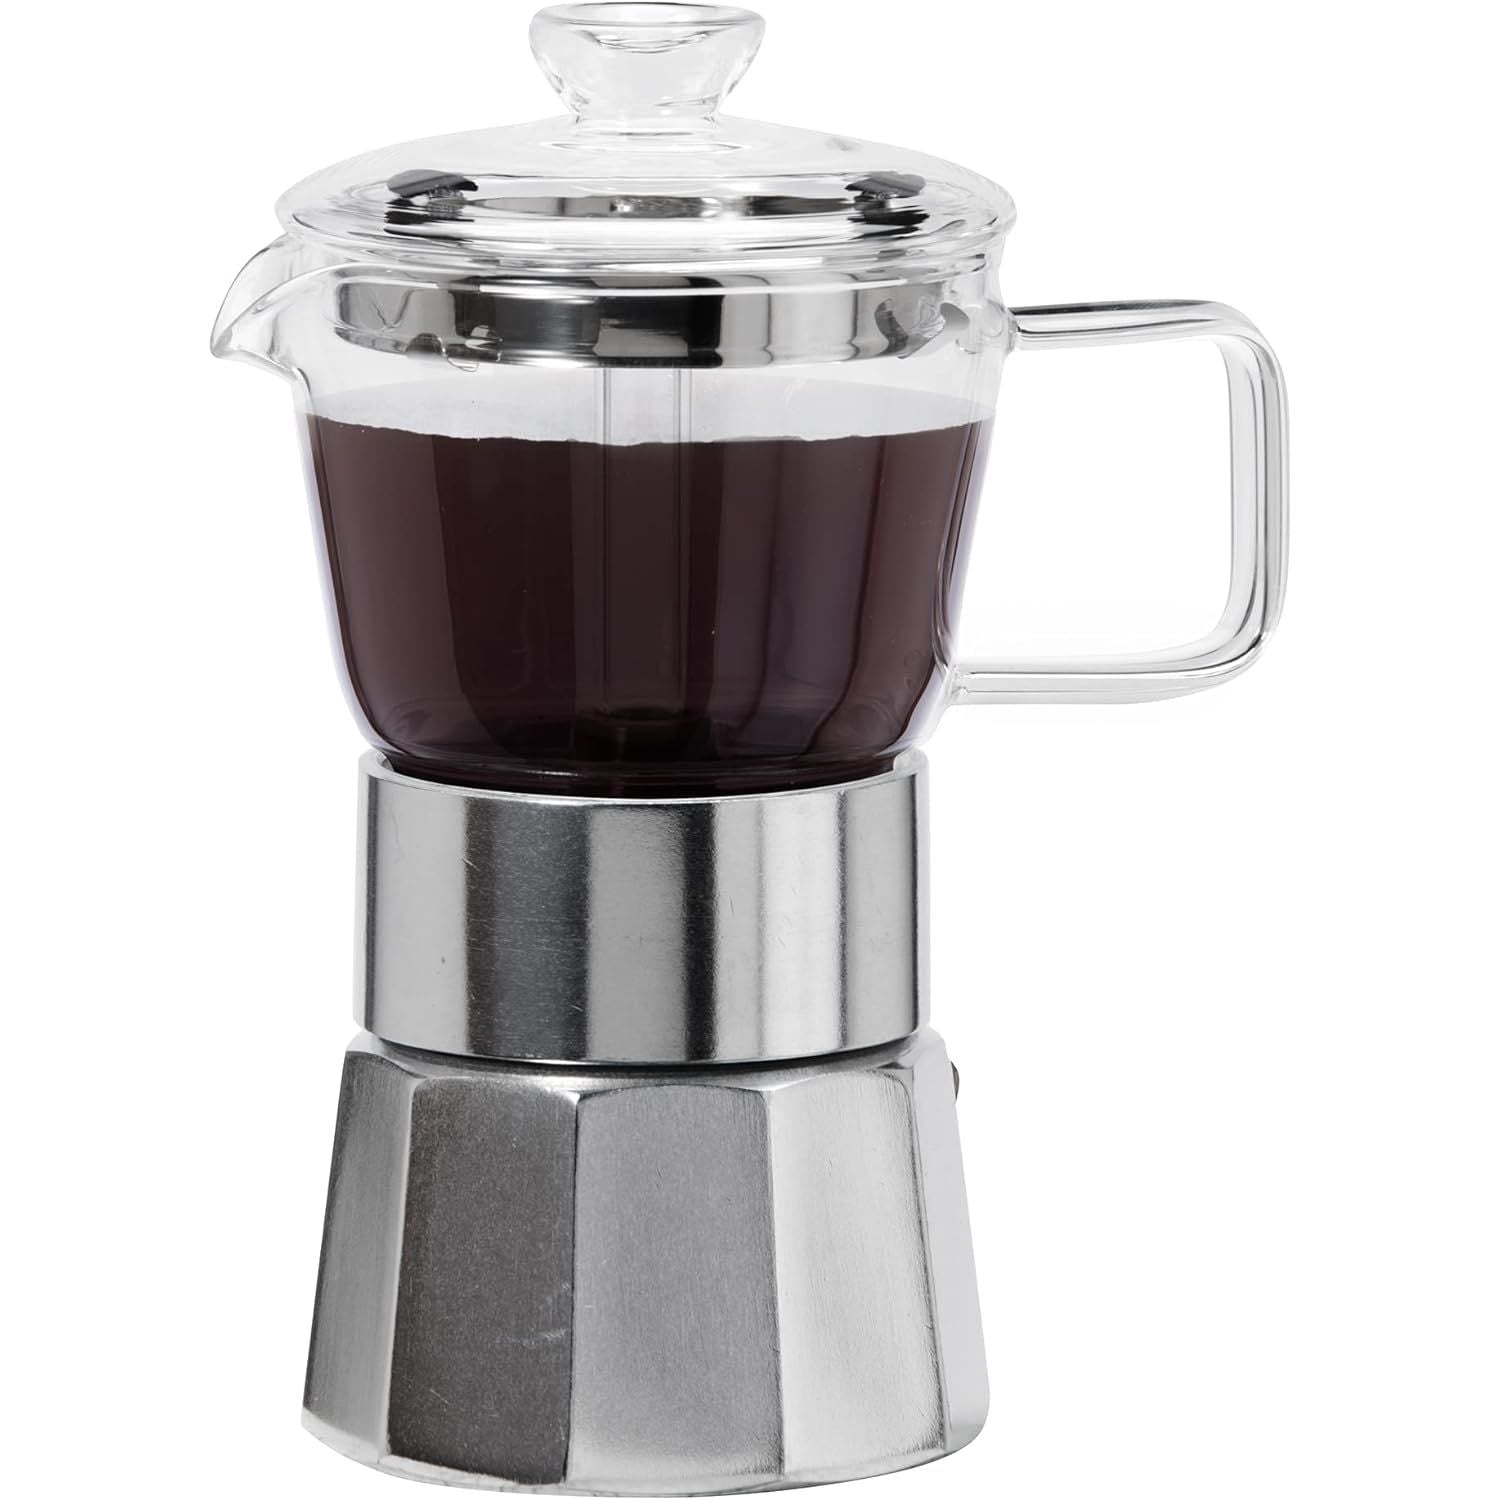 Leopold Vienna Moka Pot Stovetop Coffee Maker, Black, Stainless Steel & Red  on Food52